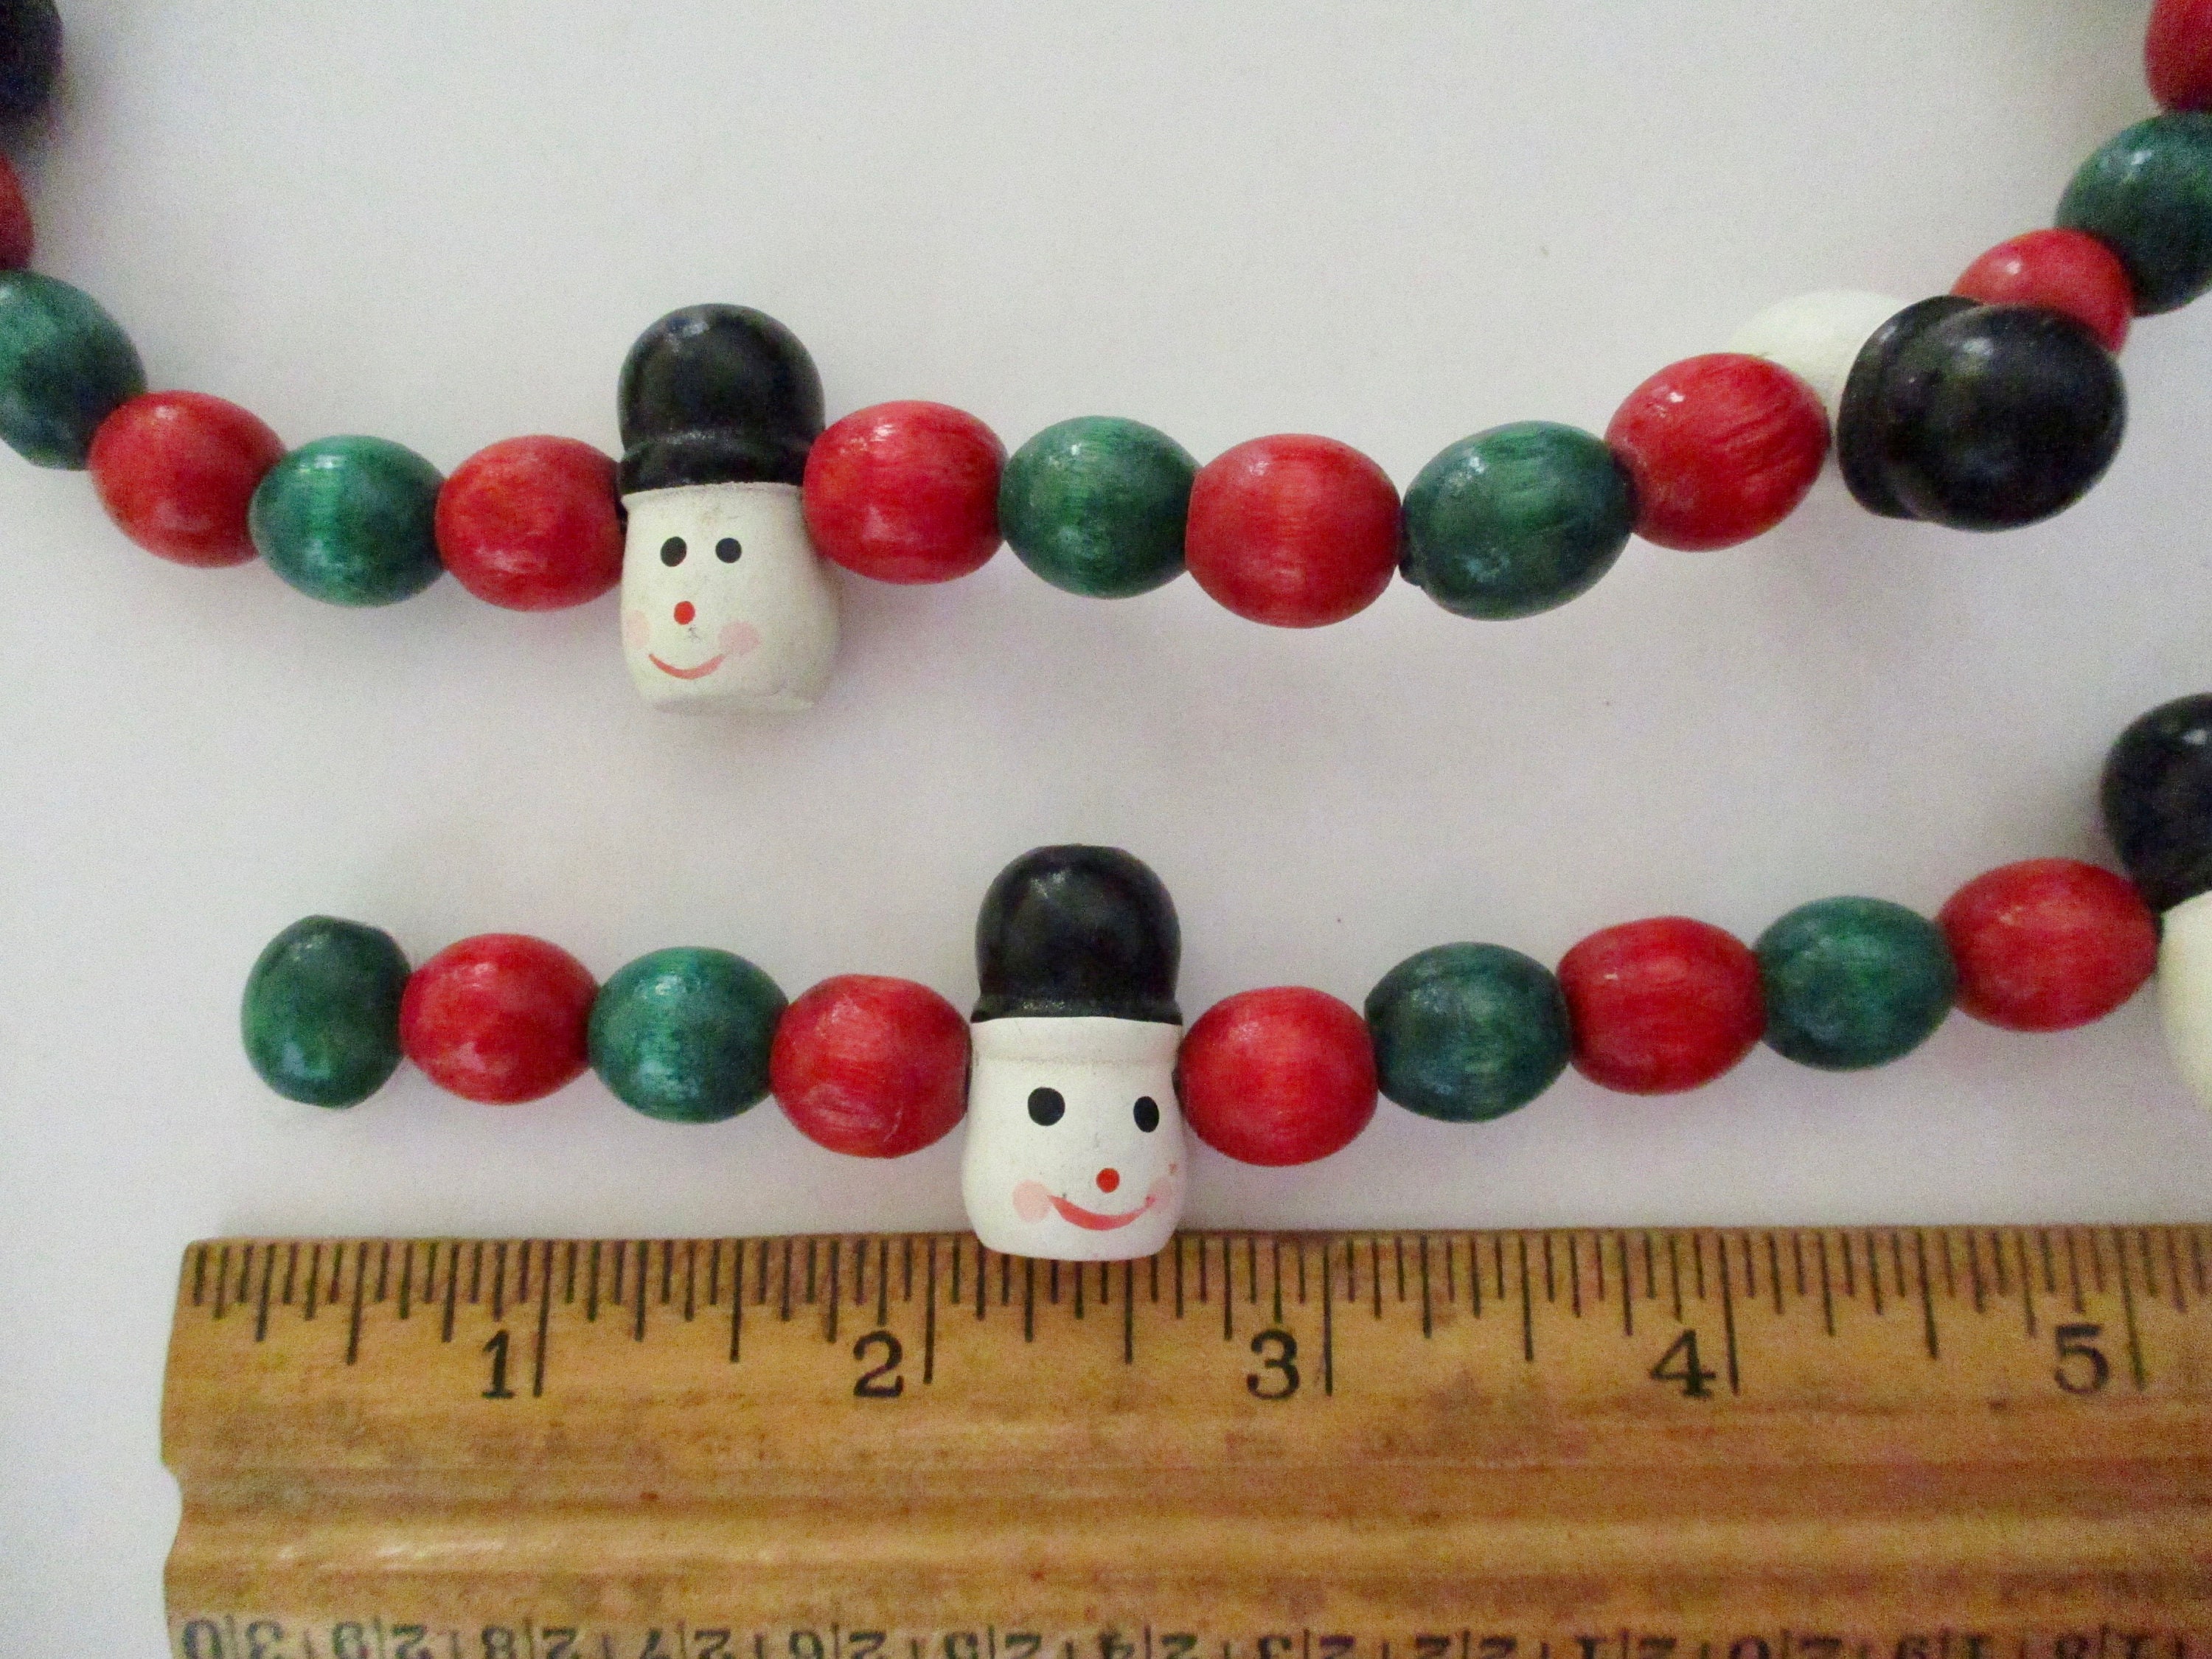 Vintage 9 Foot Long Strand of RED Wooden Bead Christmas Garland, Vintage  Christmas, Cranberry Garland, Country Christmas, Cottage Core 